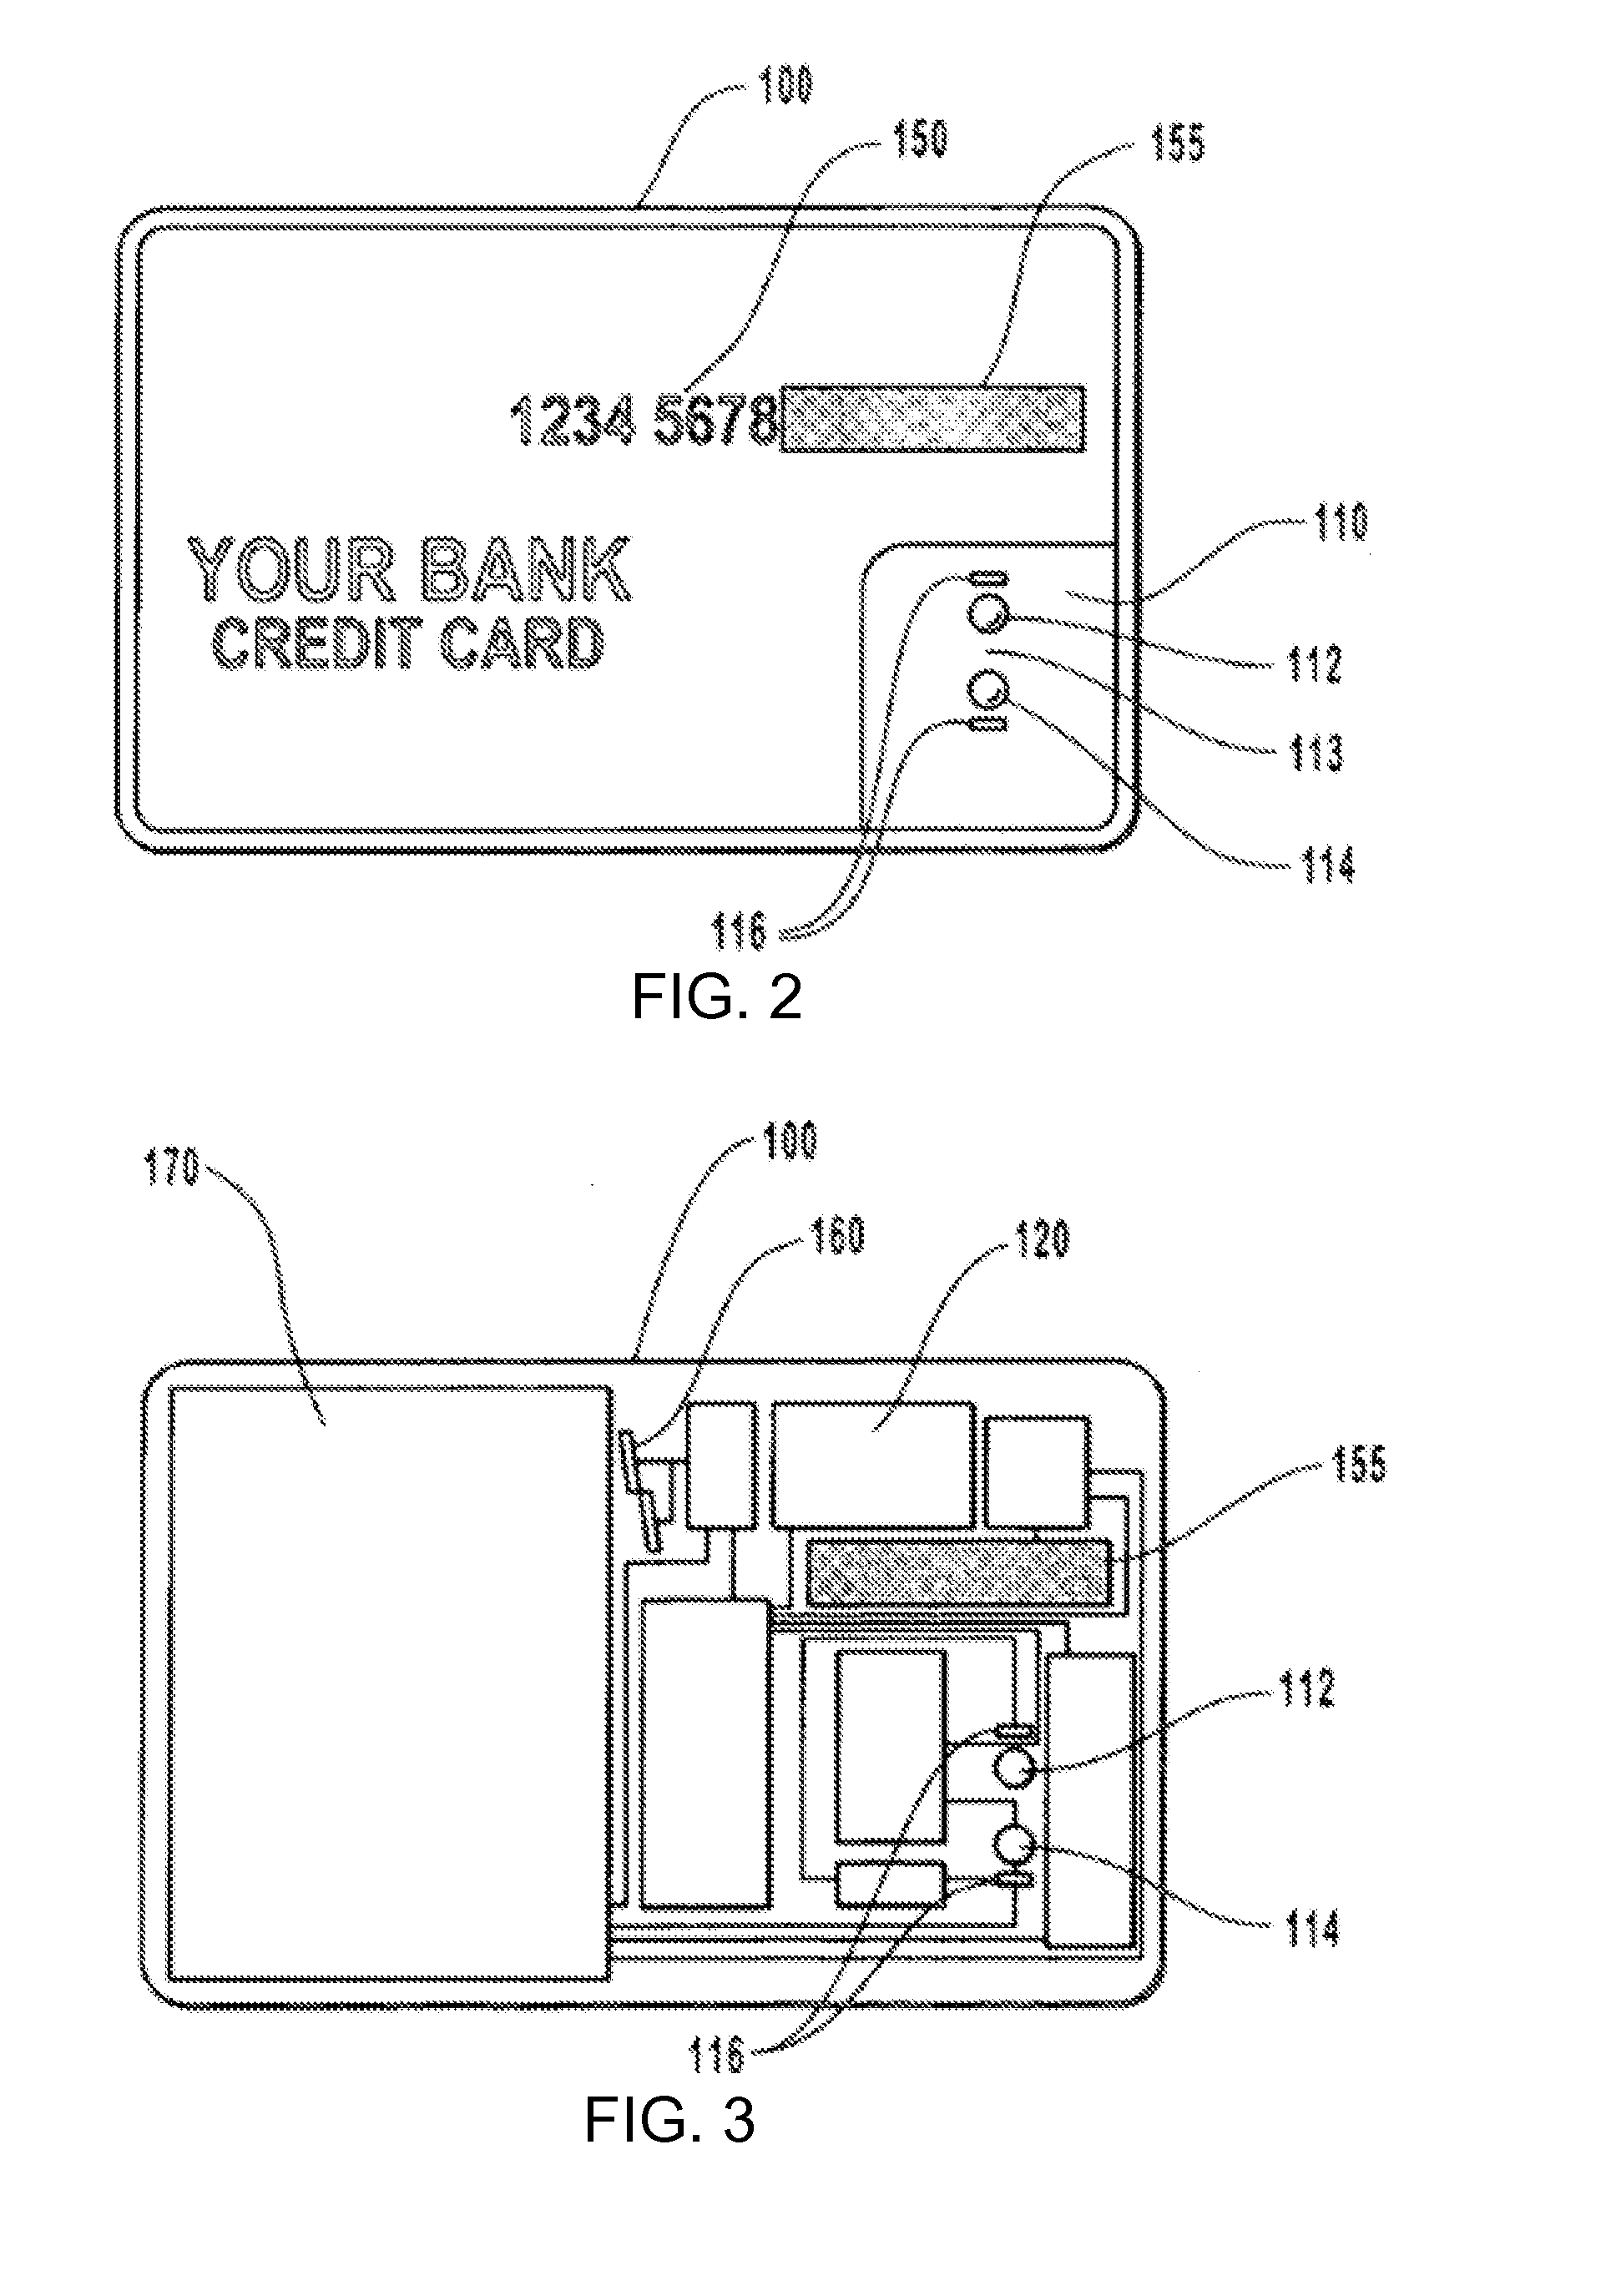 Systems and methods for securely monitoring an individual